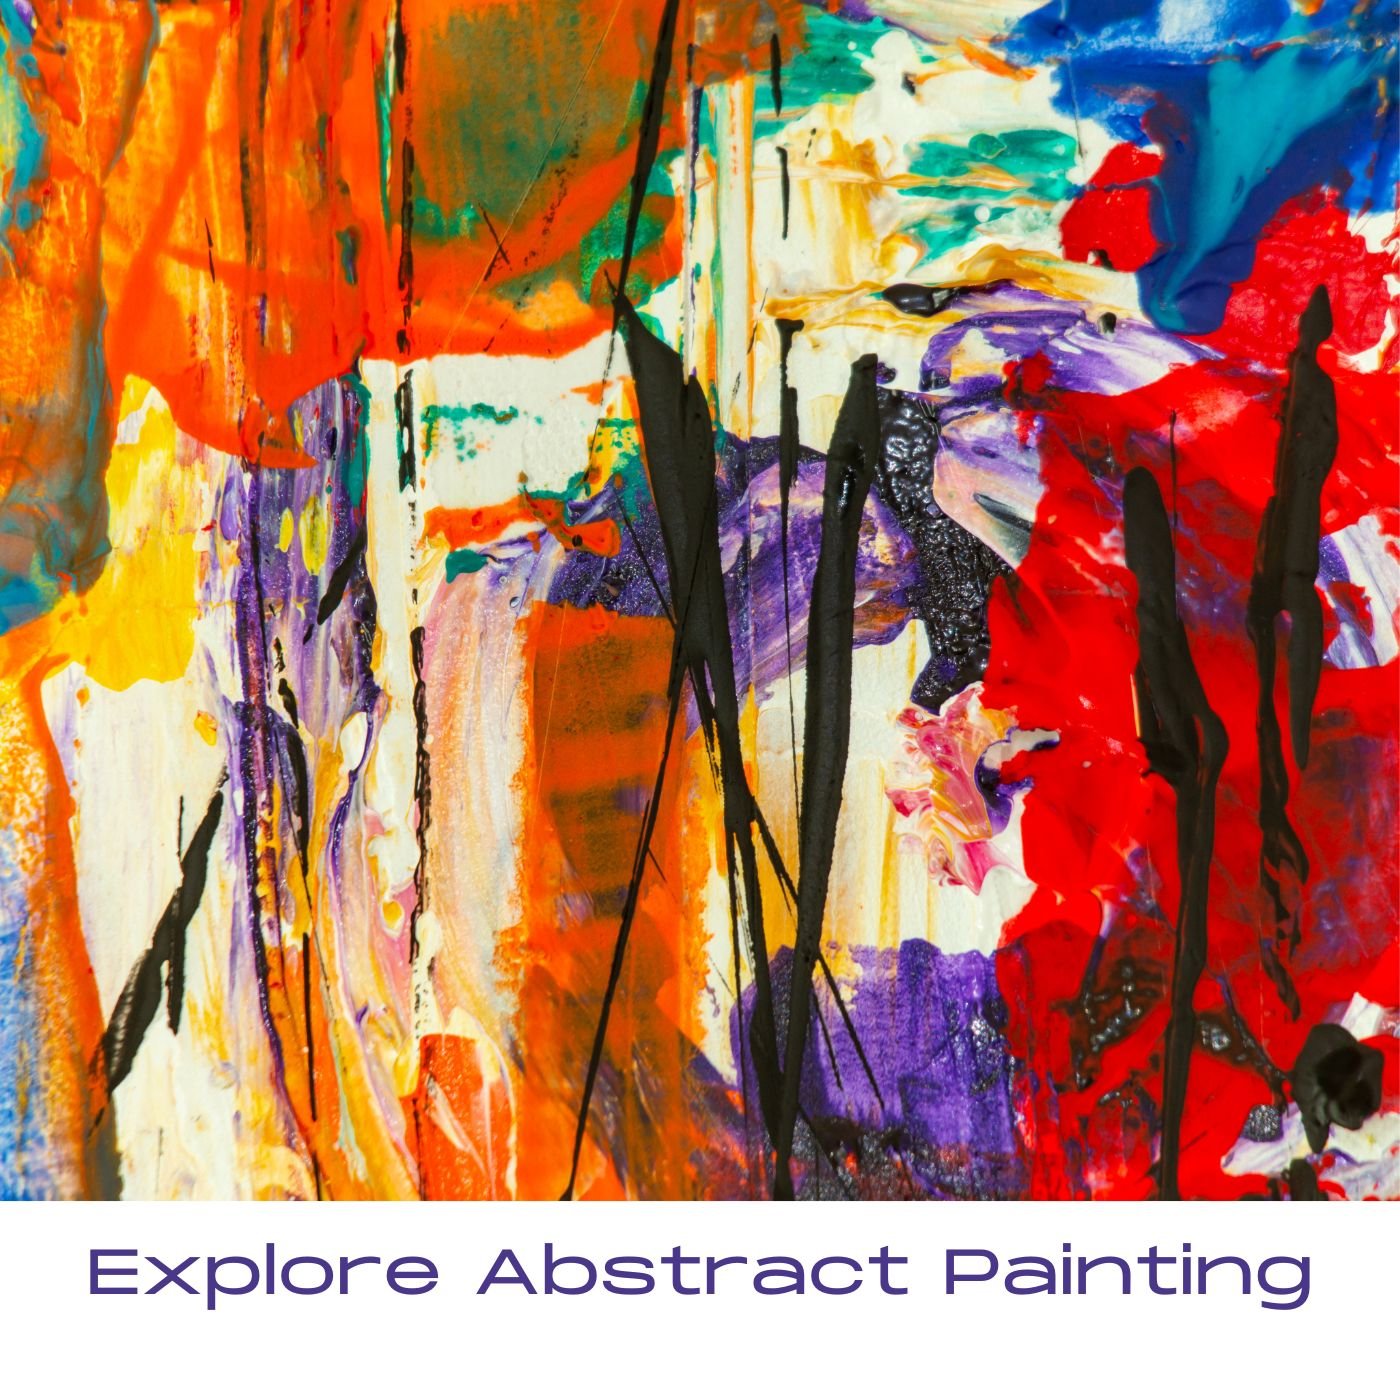 Explore Abstract Painting.jpeg